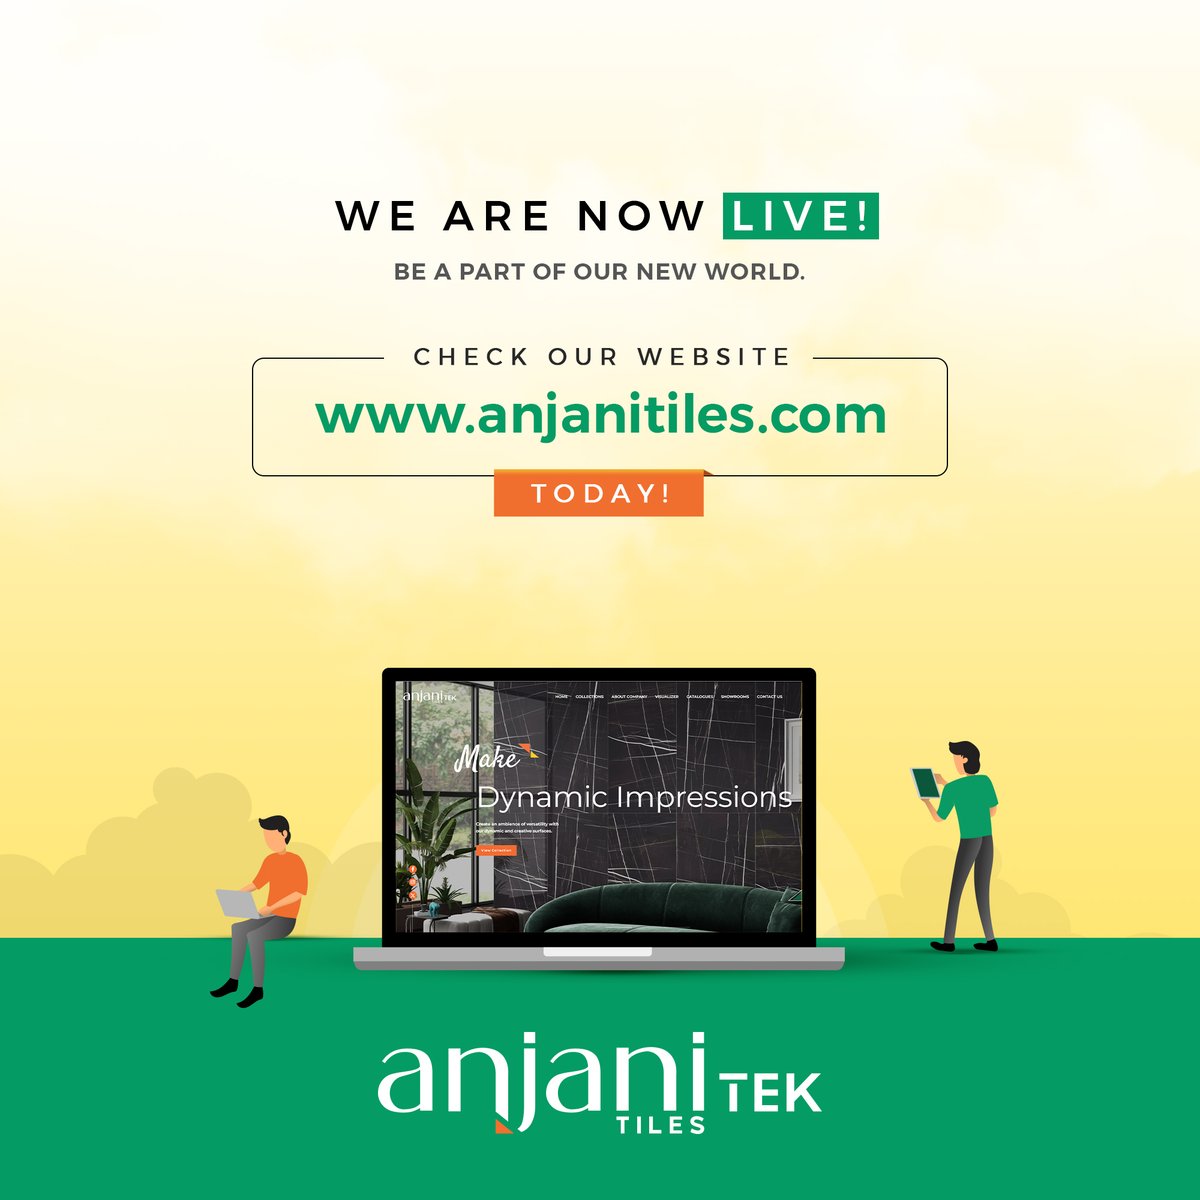 Get updates regarding our new launches and become a part of our community! Have you checked it out yet?

𝐅𝐨𝐫 𝐦𝐨𝐫𝐞 𝐝𝐞𝐭𝐚𝐢𝐥𝐬, 𝐯𝐢𝐬𝐢𝐭:  anjanitiles.com

#Anjanitektiles #VitrifiedTiles #60X60cm #60X120cm #TilesManufacturers #LuxuryHouse #HomeDecor #FloorTile